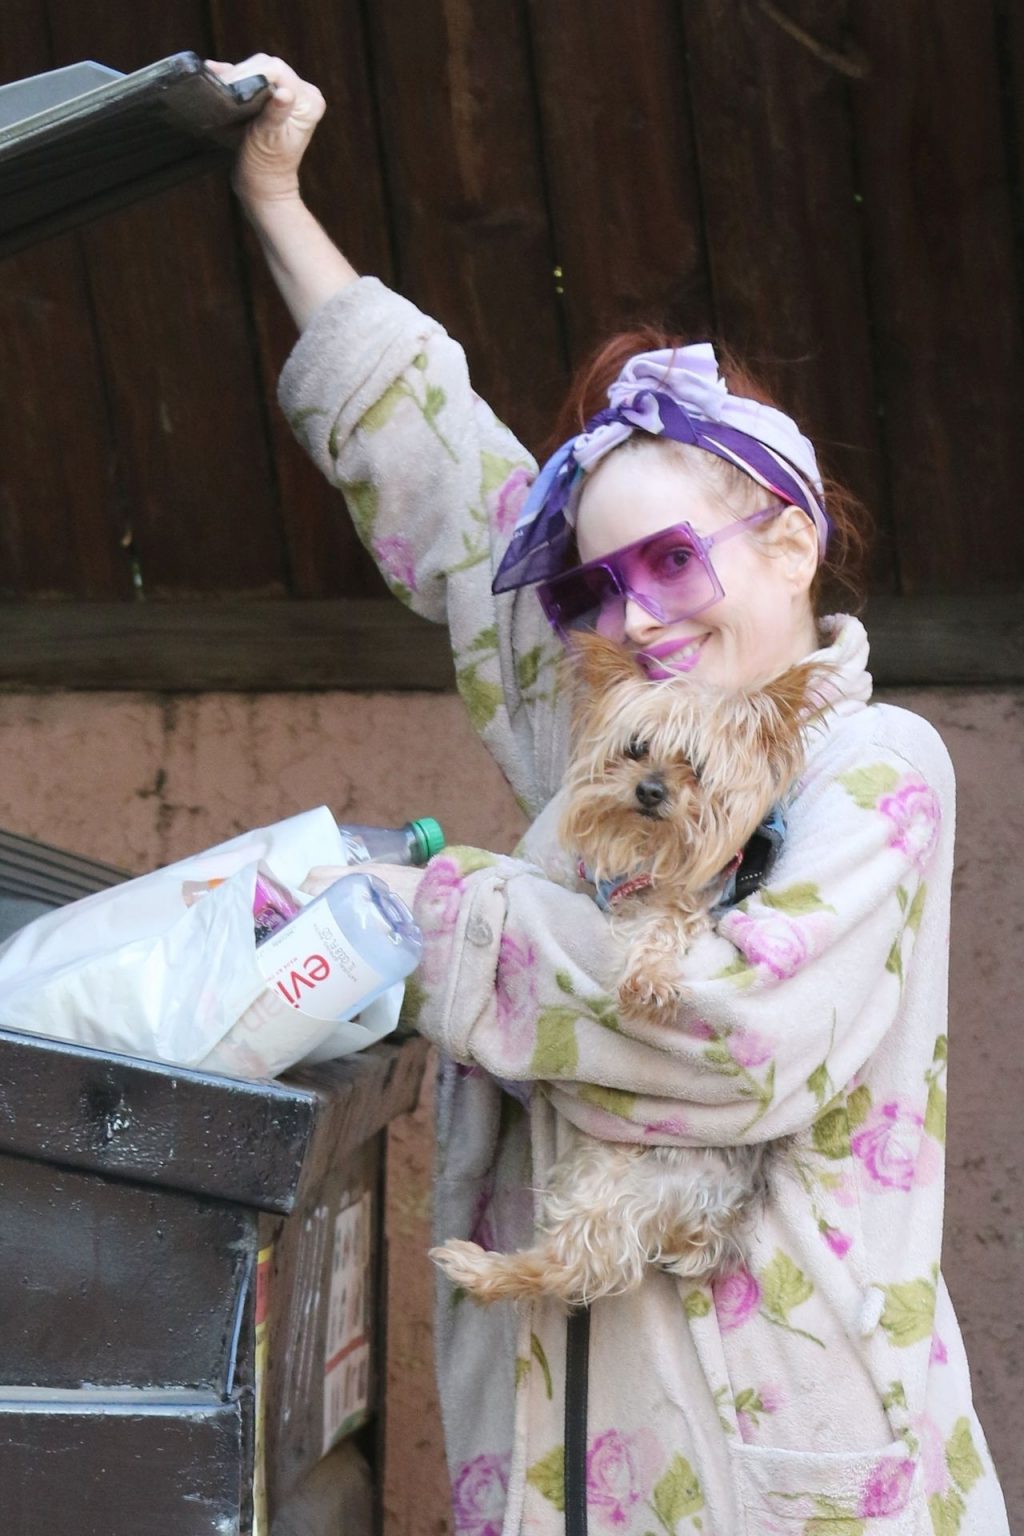 Phoebe Price is Seen Taking the Trash Out (41 Photos)